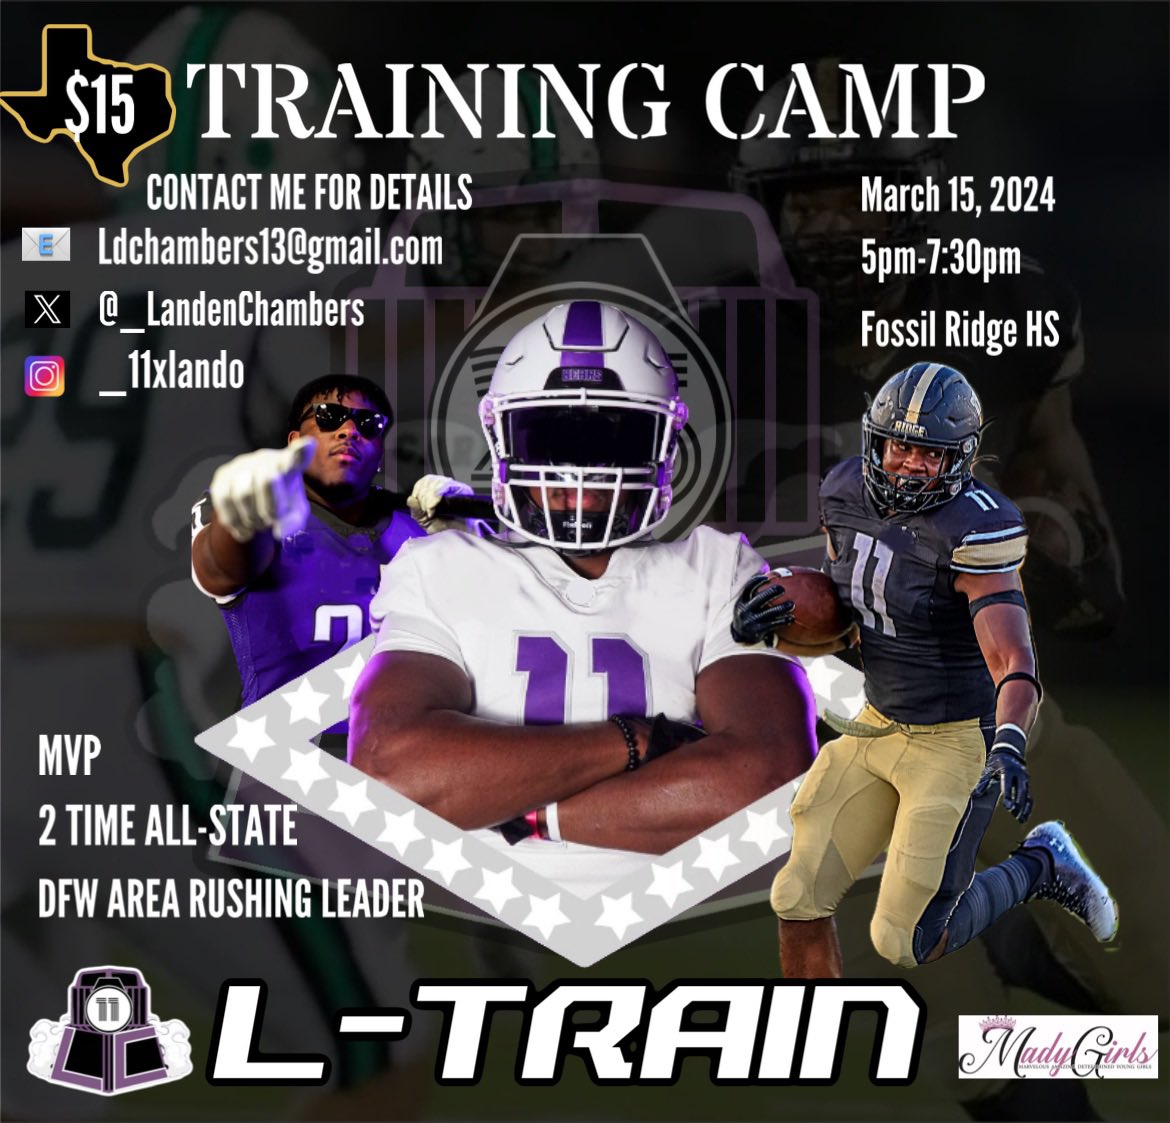 LETS WORK!!!! Excited to announce my first spring break training camp in Fort Worth, Texas! Training will be held at Fossil Ridge HS!!! Contact me for more details!!!